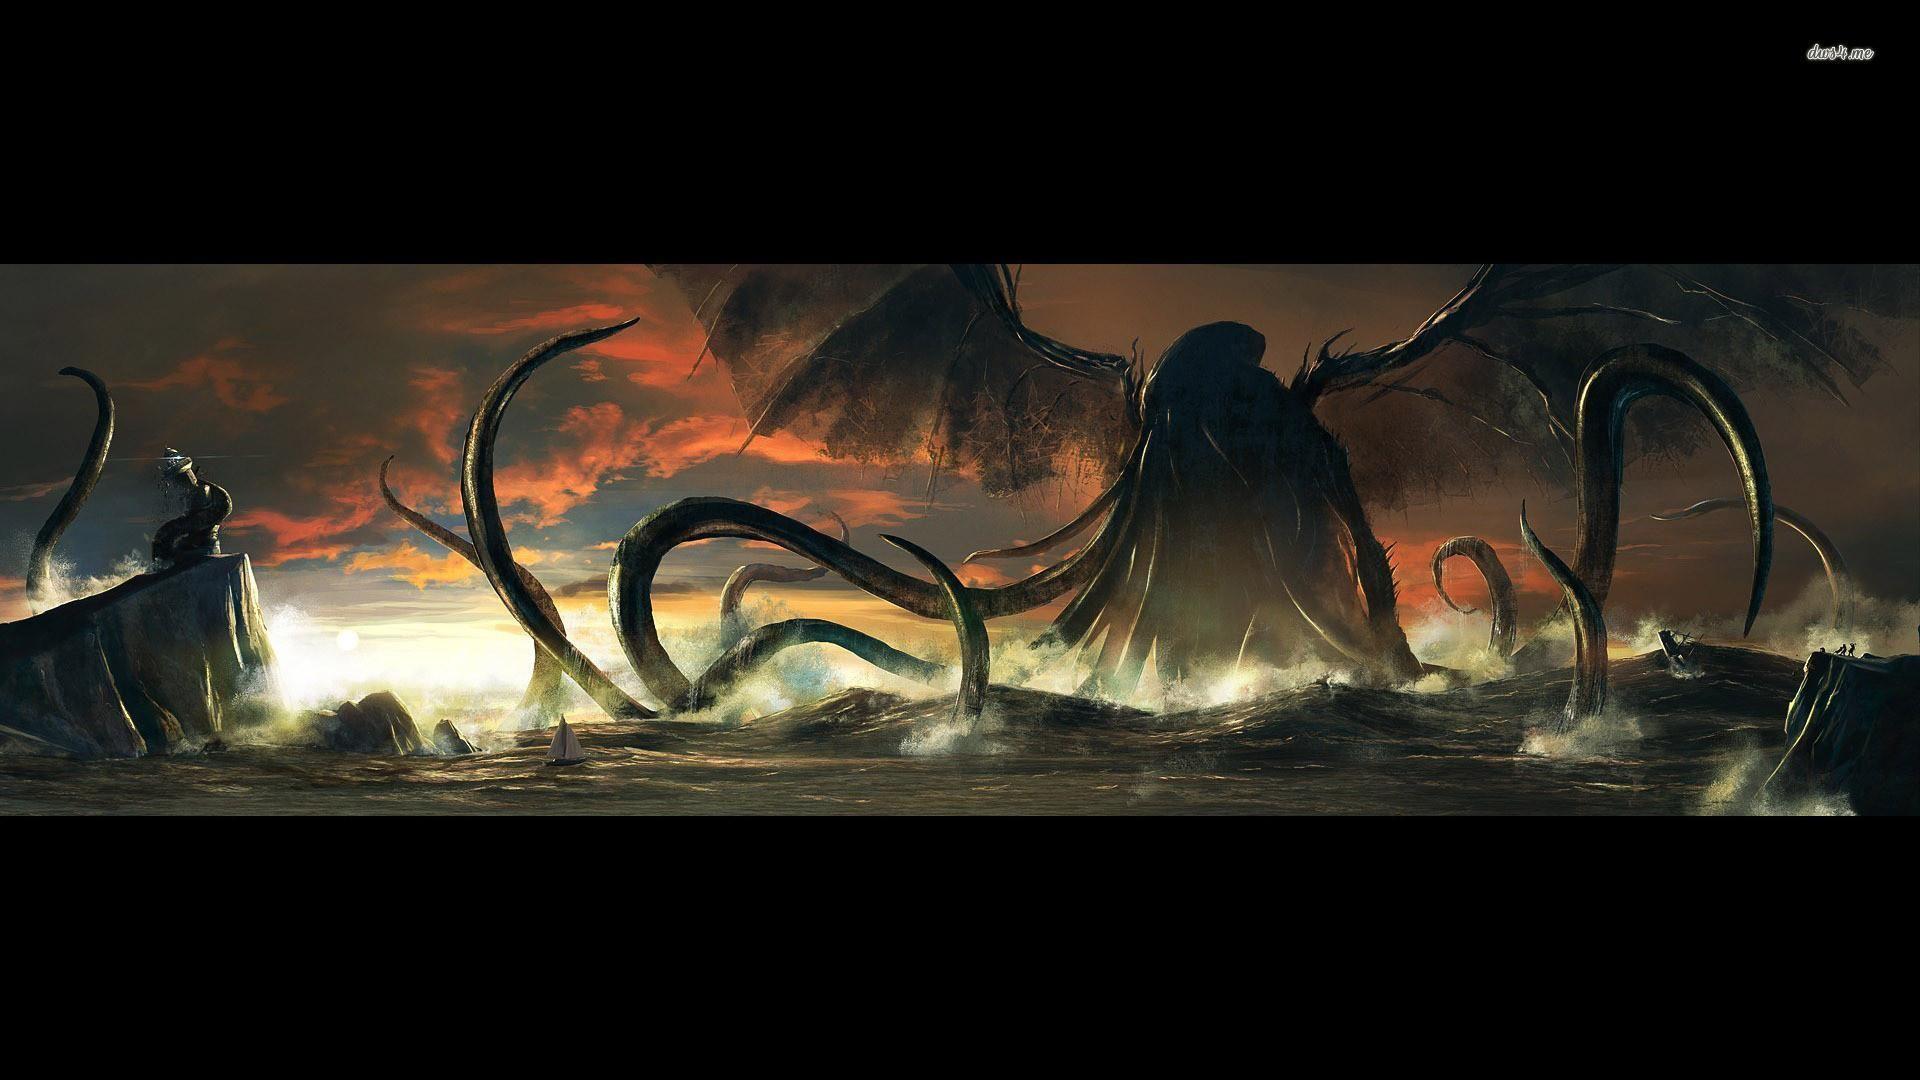 Cthulhu: Reality Cthulhu Wallpaper for PC & Mac, Laptop, Tablet